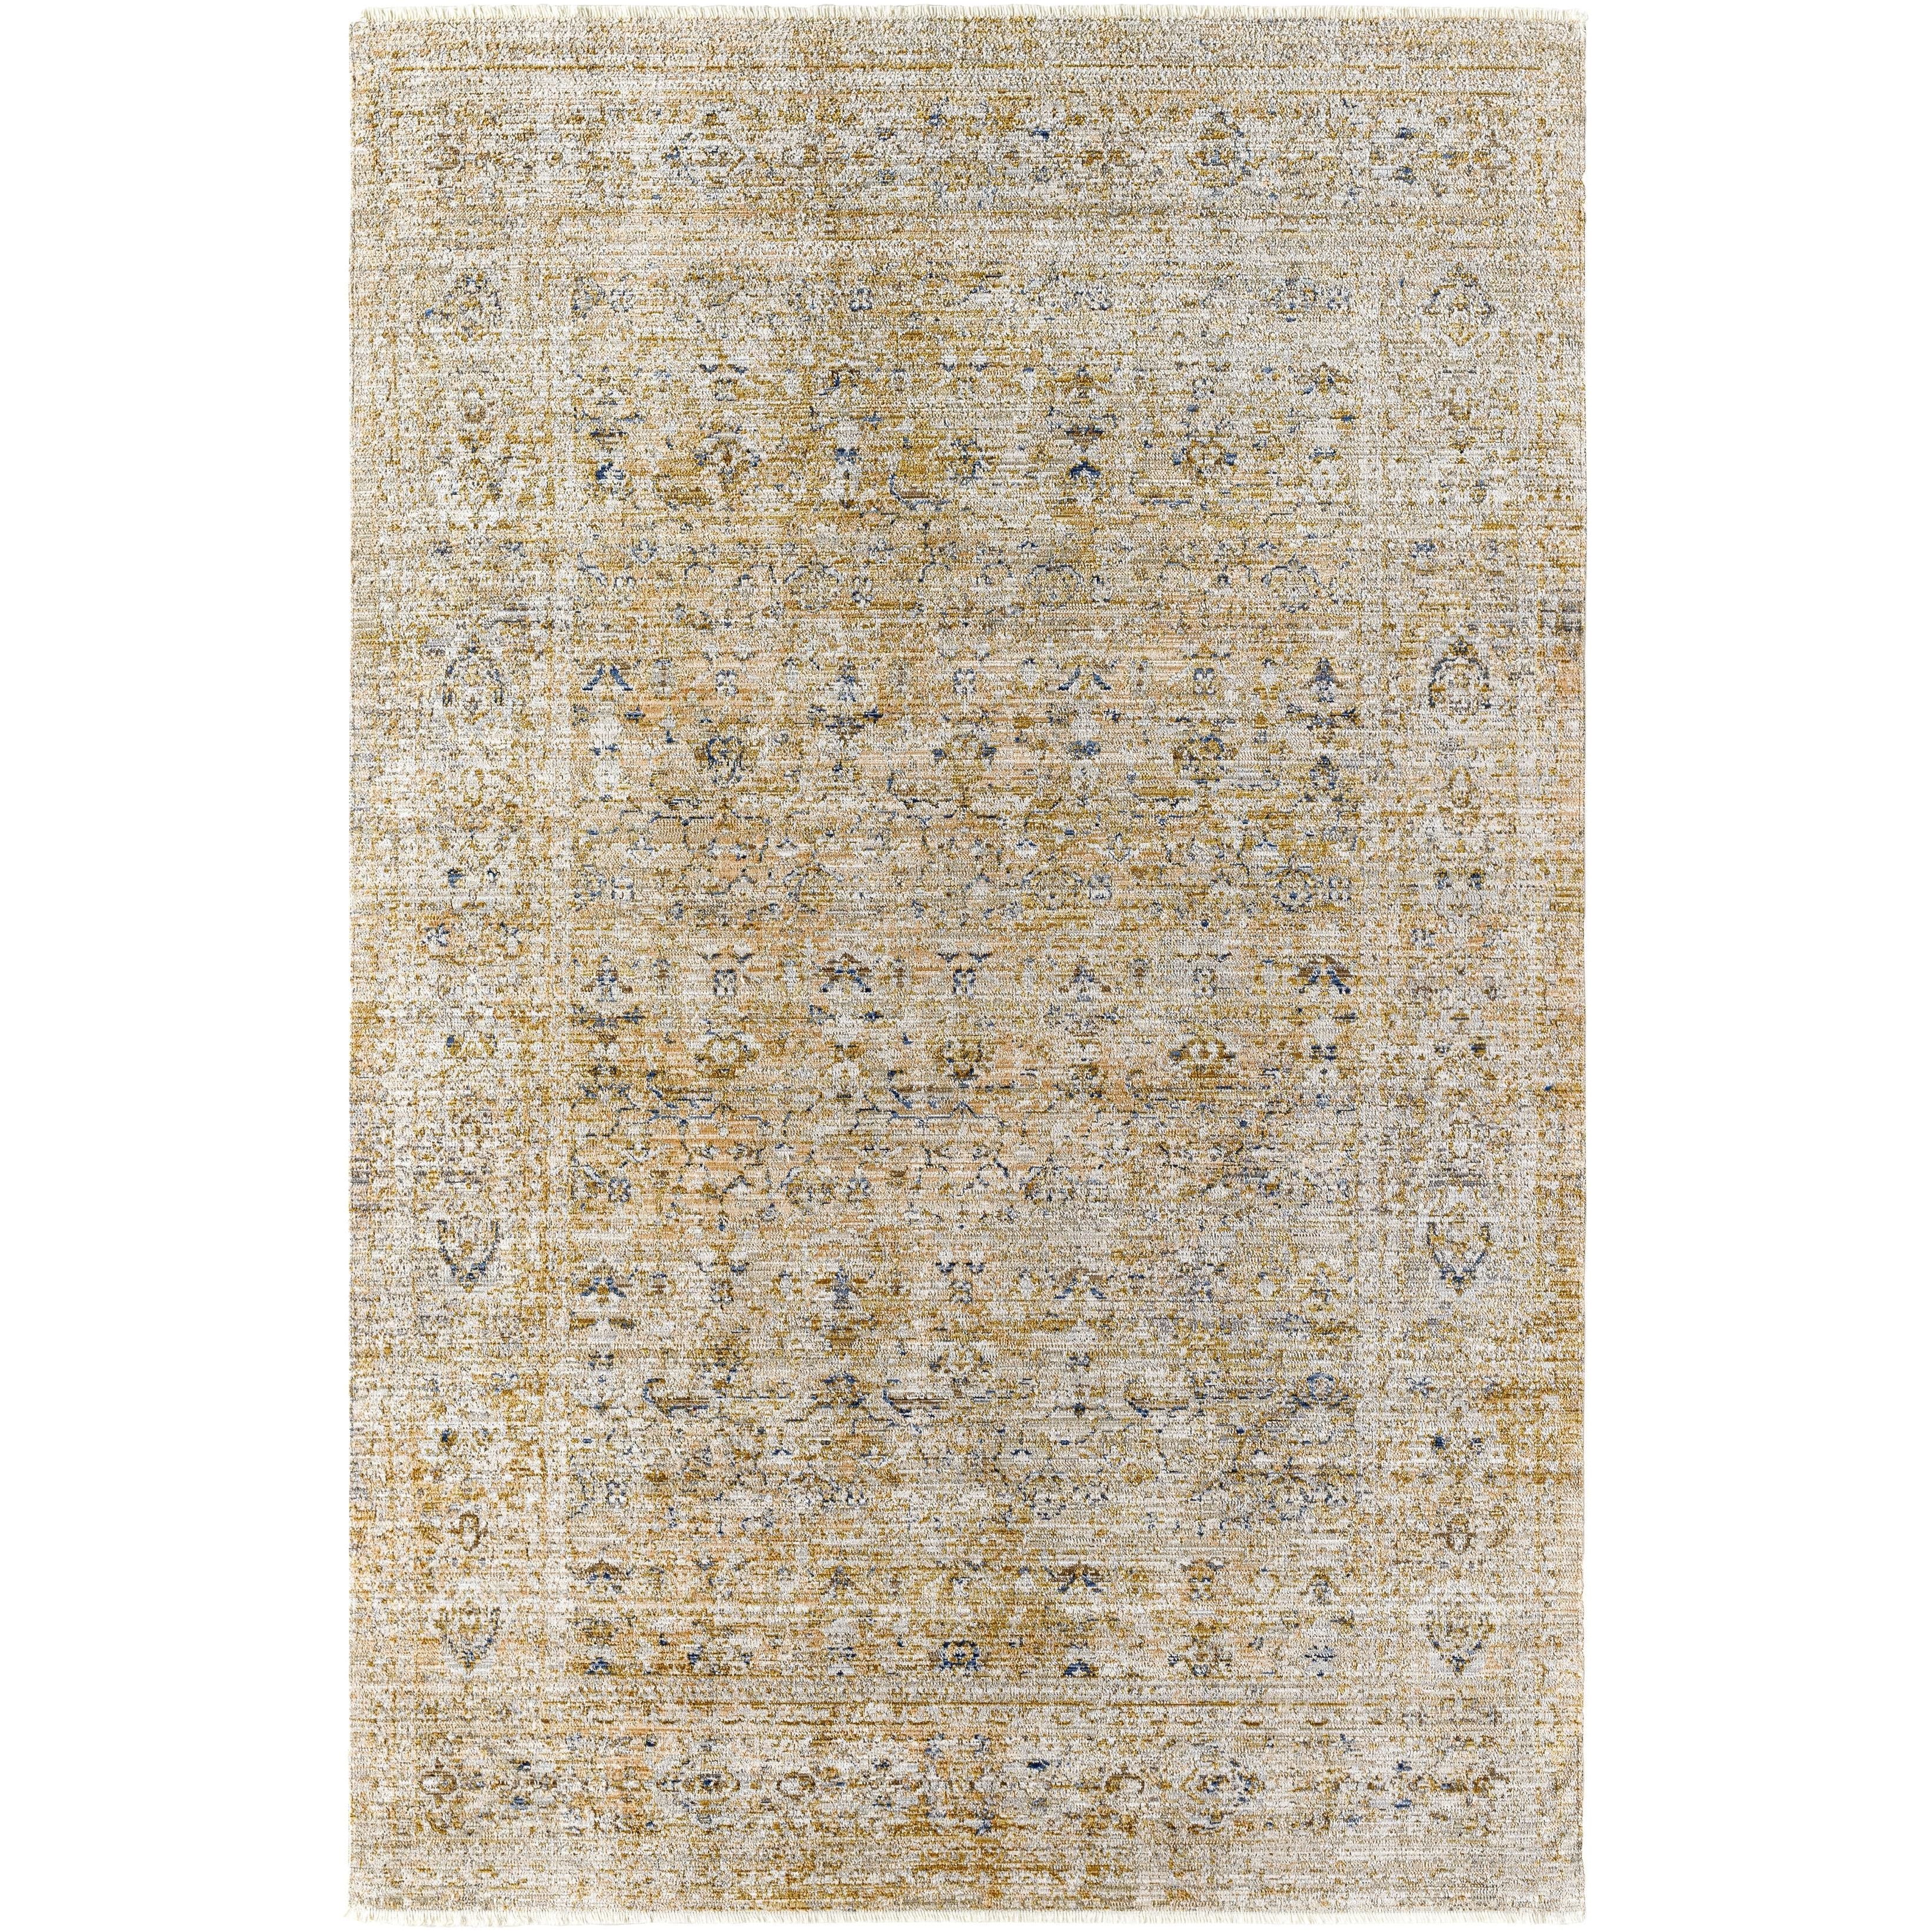 The Margaret area rug is a truly special collection from our Becki Owens x Surya line. A beautiful addition to any room, the Margaret area rug features a unique combination of warm neutrals and navy details. Amethyst Home provides interior design, new home construction design consulting, vintage area rugs, and lighting in the Salt Lake City metro area.